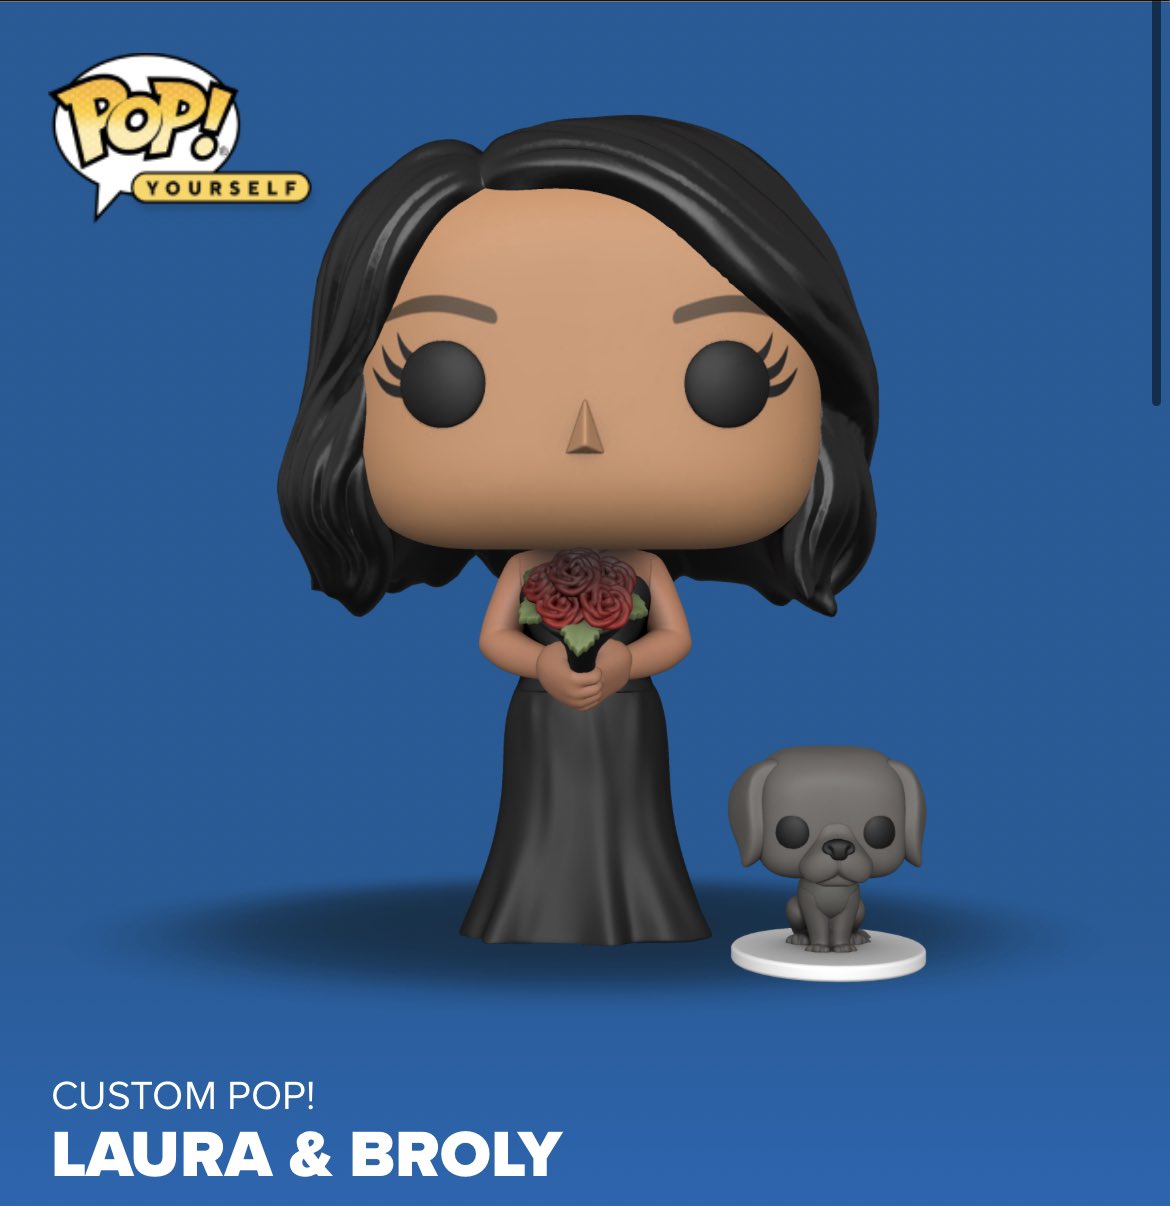 Funko POP News ! on "Did you Yourself today? One of the new features of the website is an upgraded POP Yourself page ~ feel free to your creations